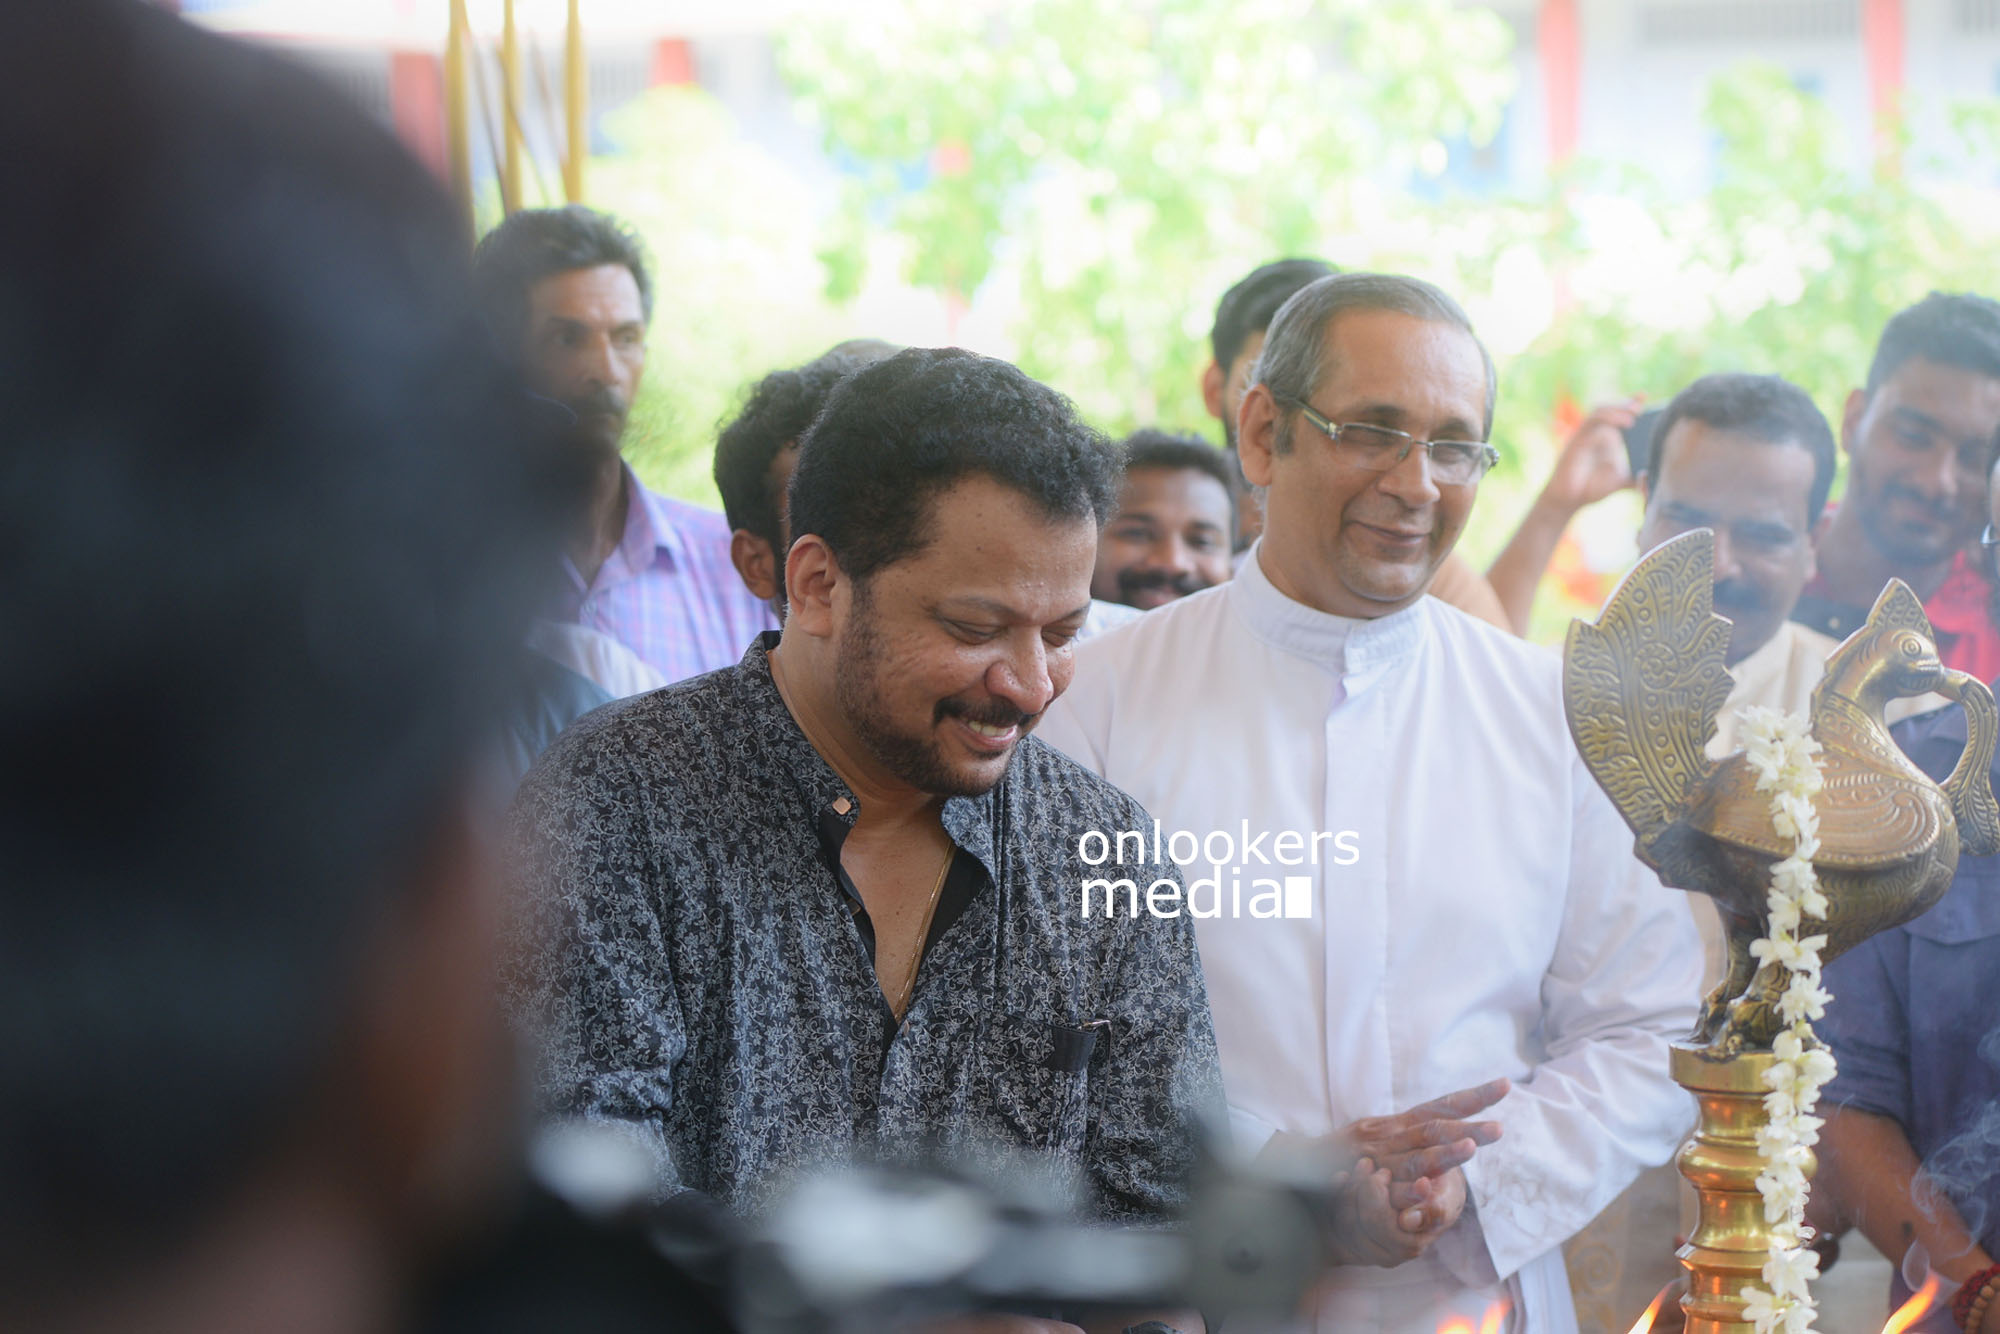 http://onlookersmedia.in/wp-content/uploads/2017/05/Lal-Jose-Mohanlal-movie-Pooja-stills-images-photos-160.jpg